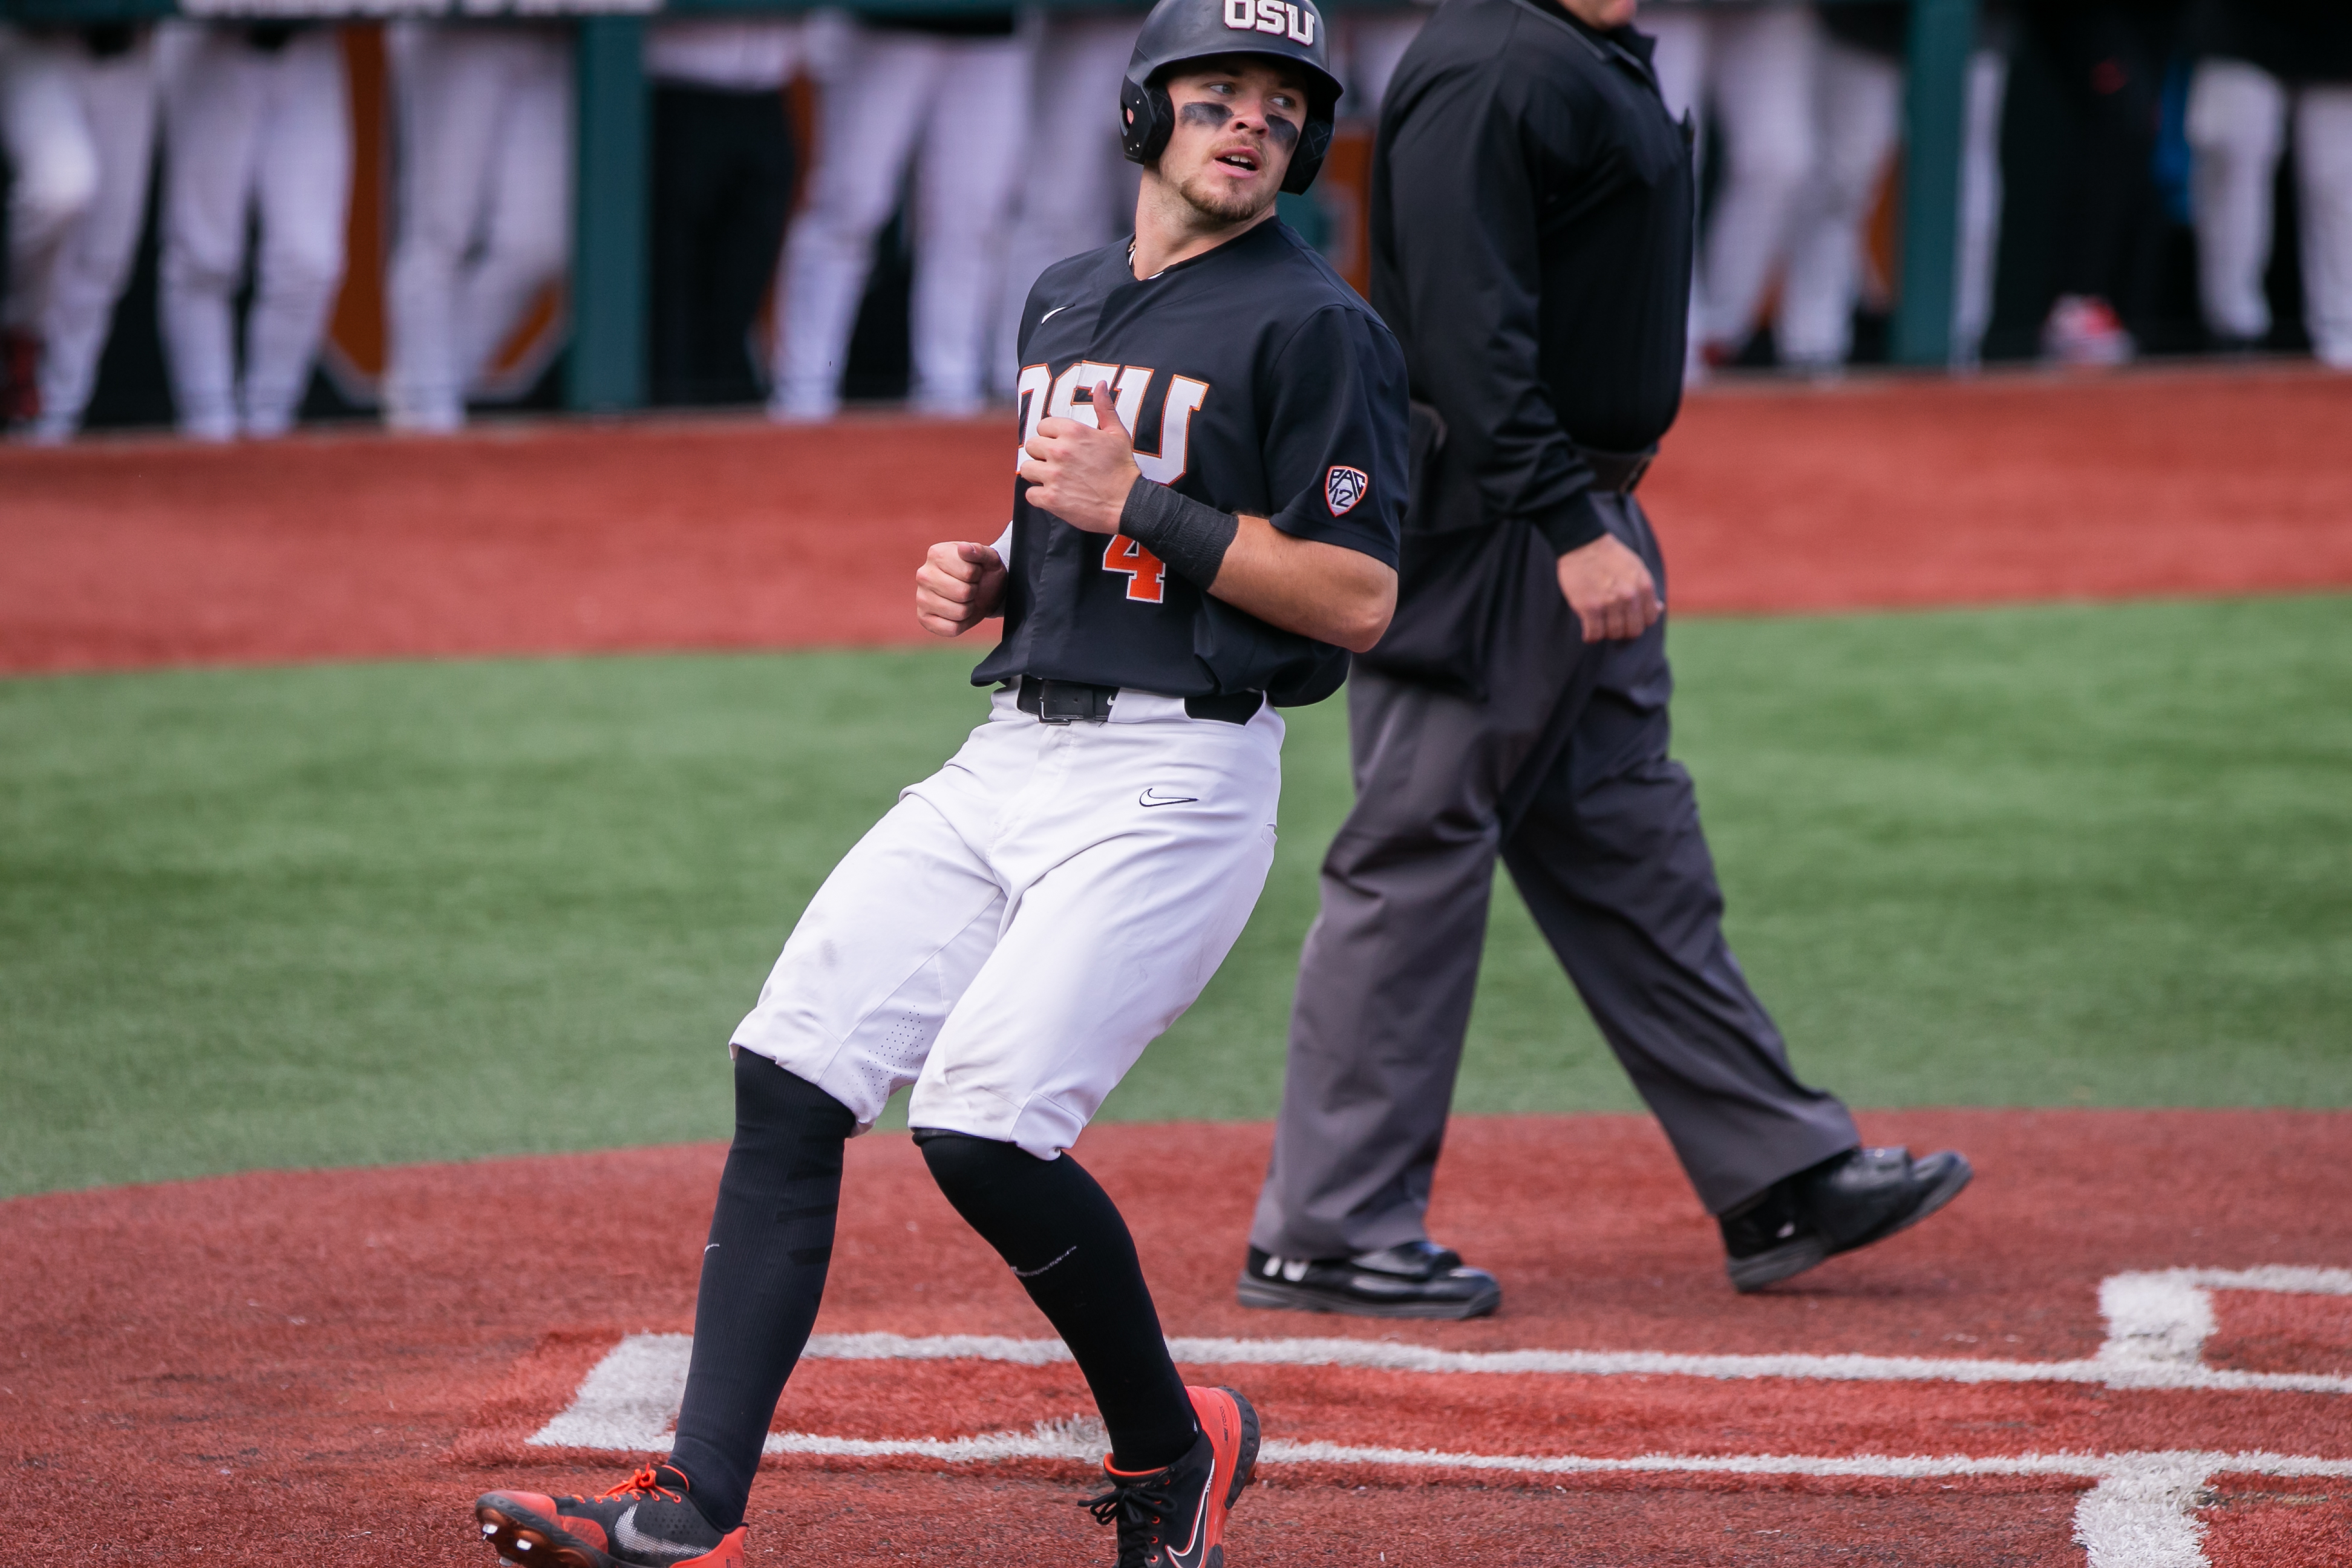 Oregon State baseball: Beavers to sport new classy look in 2010 